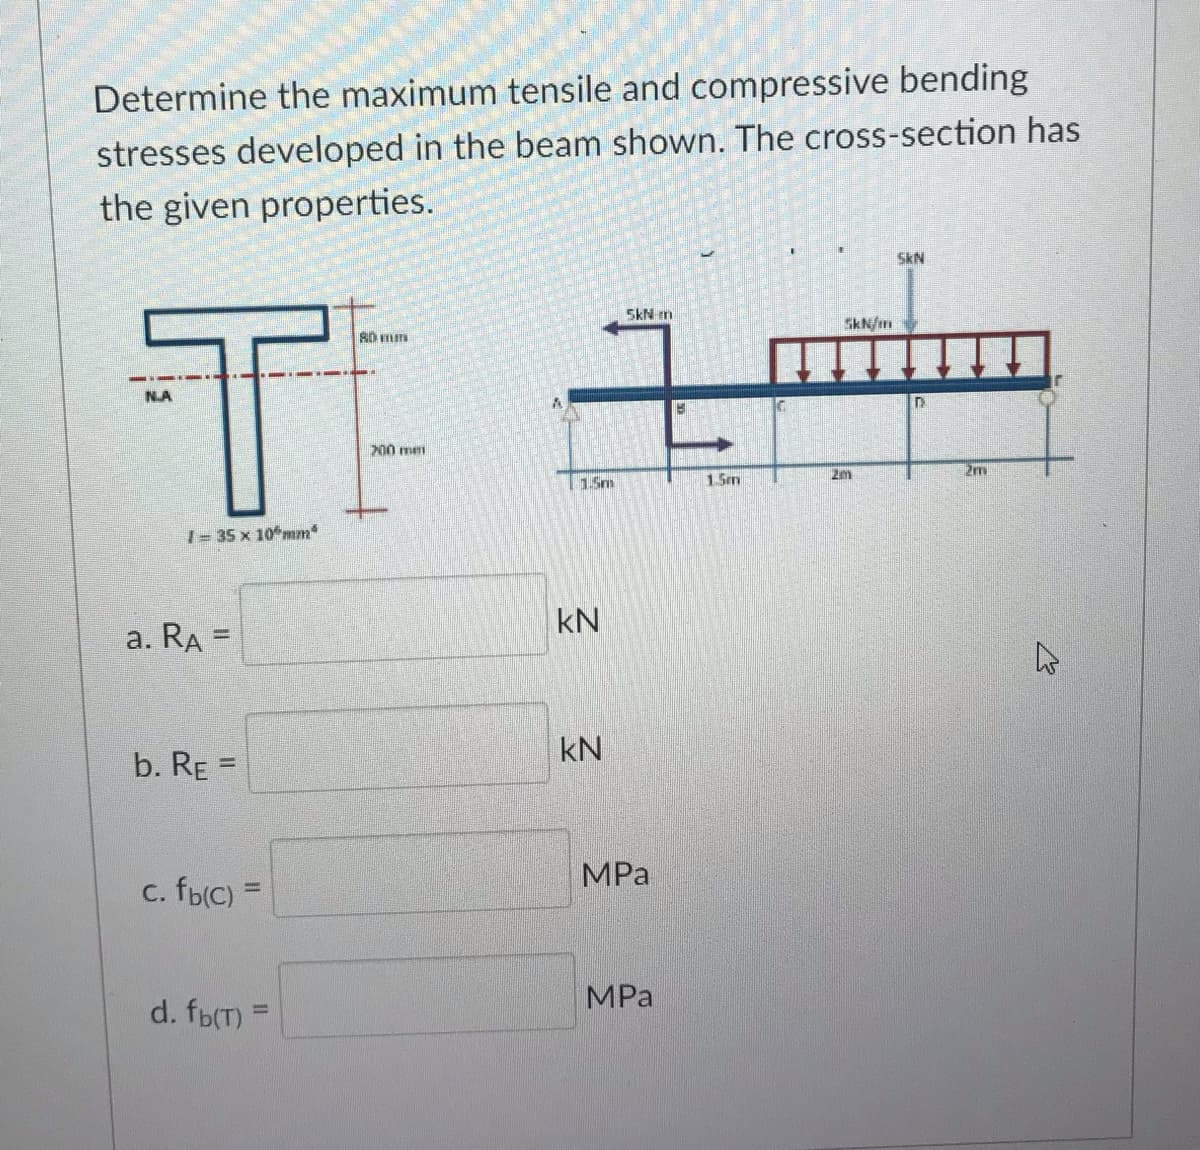 Determine the maximum tensile and compressive bending
stresses developed in the beam shown. The cross-section has
the given properties.
NA
1-35 x 10mm
a. RA =
b. RE=
c. fb(c) =
d. fb(T) =
80 mm
200 mm
A
1.5m
kN
KN
5kN m
MPa
MPa
B
1.5m
SkN/m
2m
5KN
n
2m
4